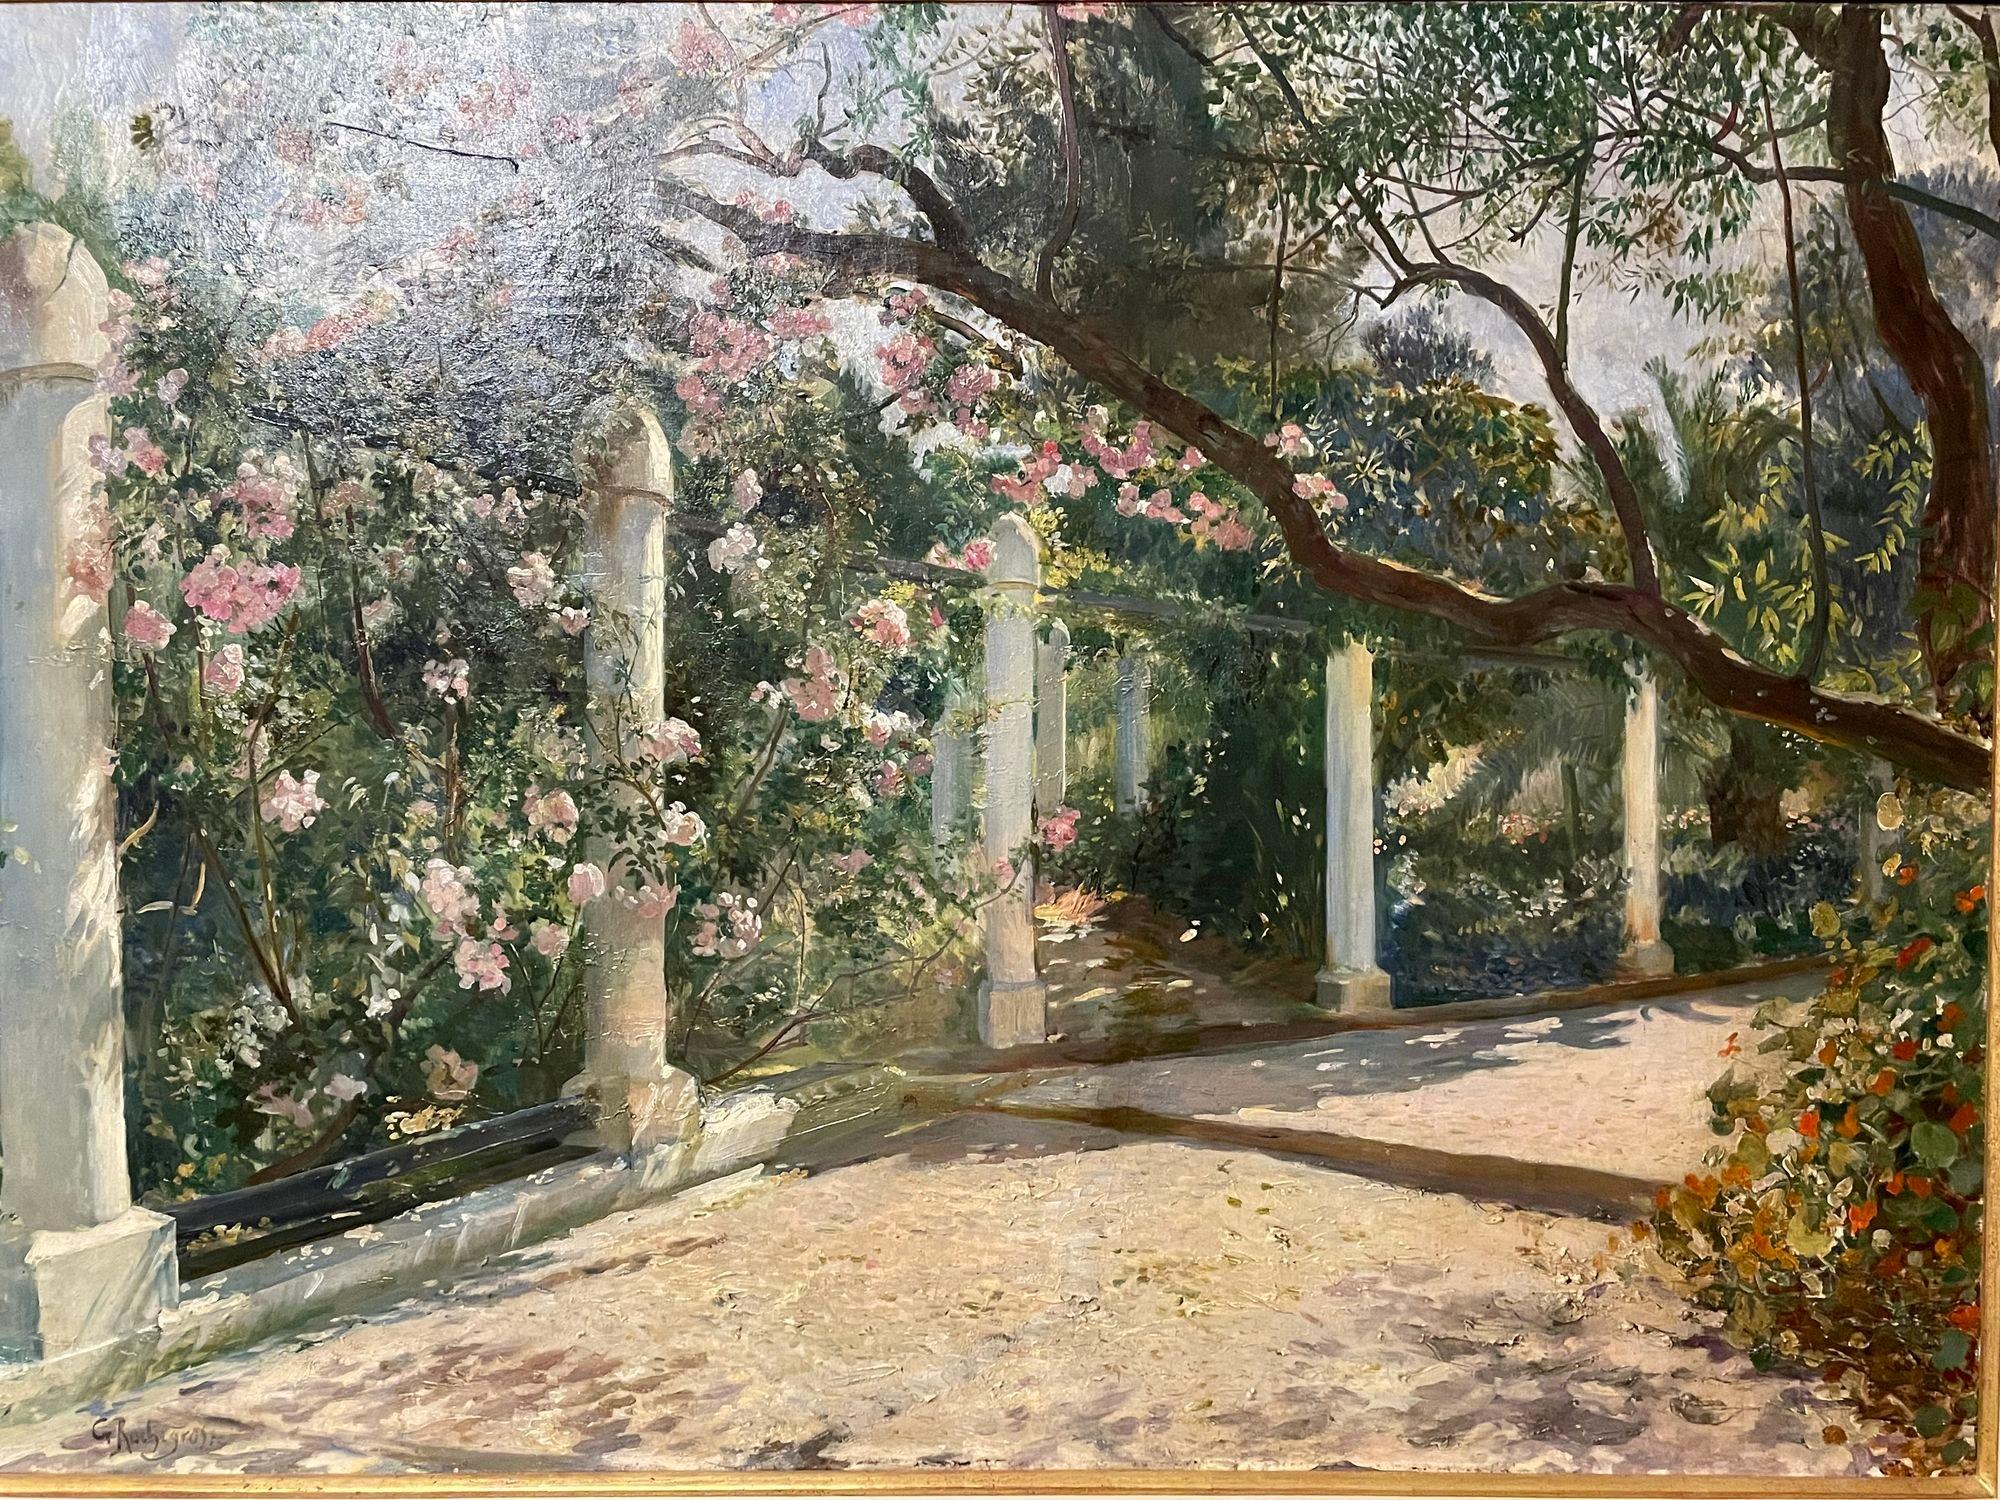 Paint Georges Antoine Rochegrosse, Oil on Canvas, Almond Trees, Sotheby's Provenance For Sale